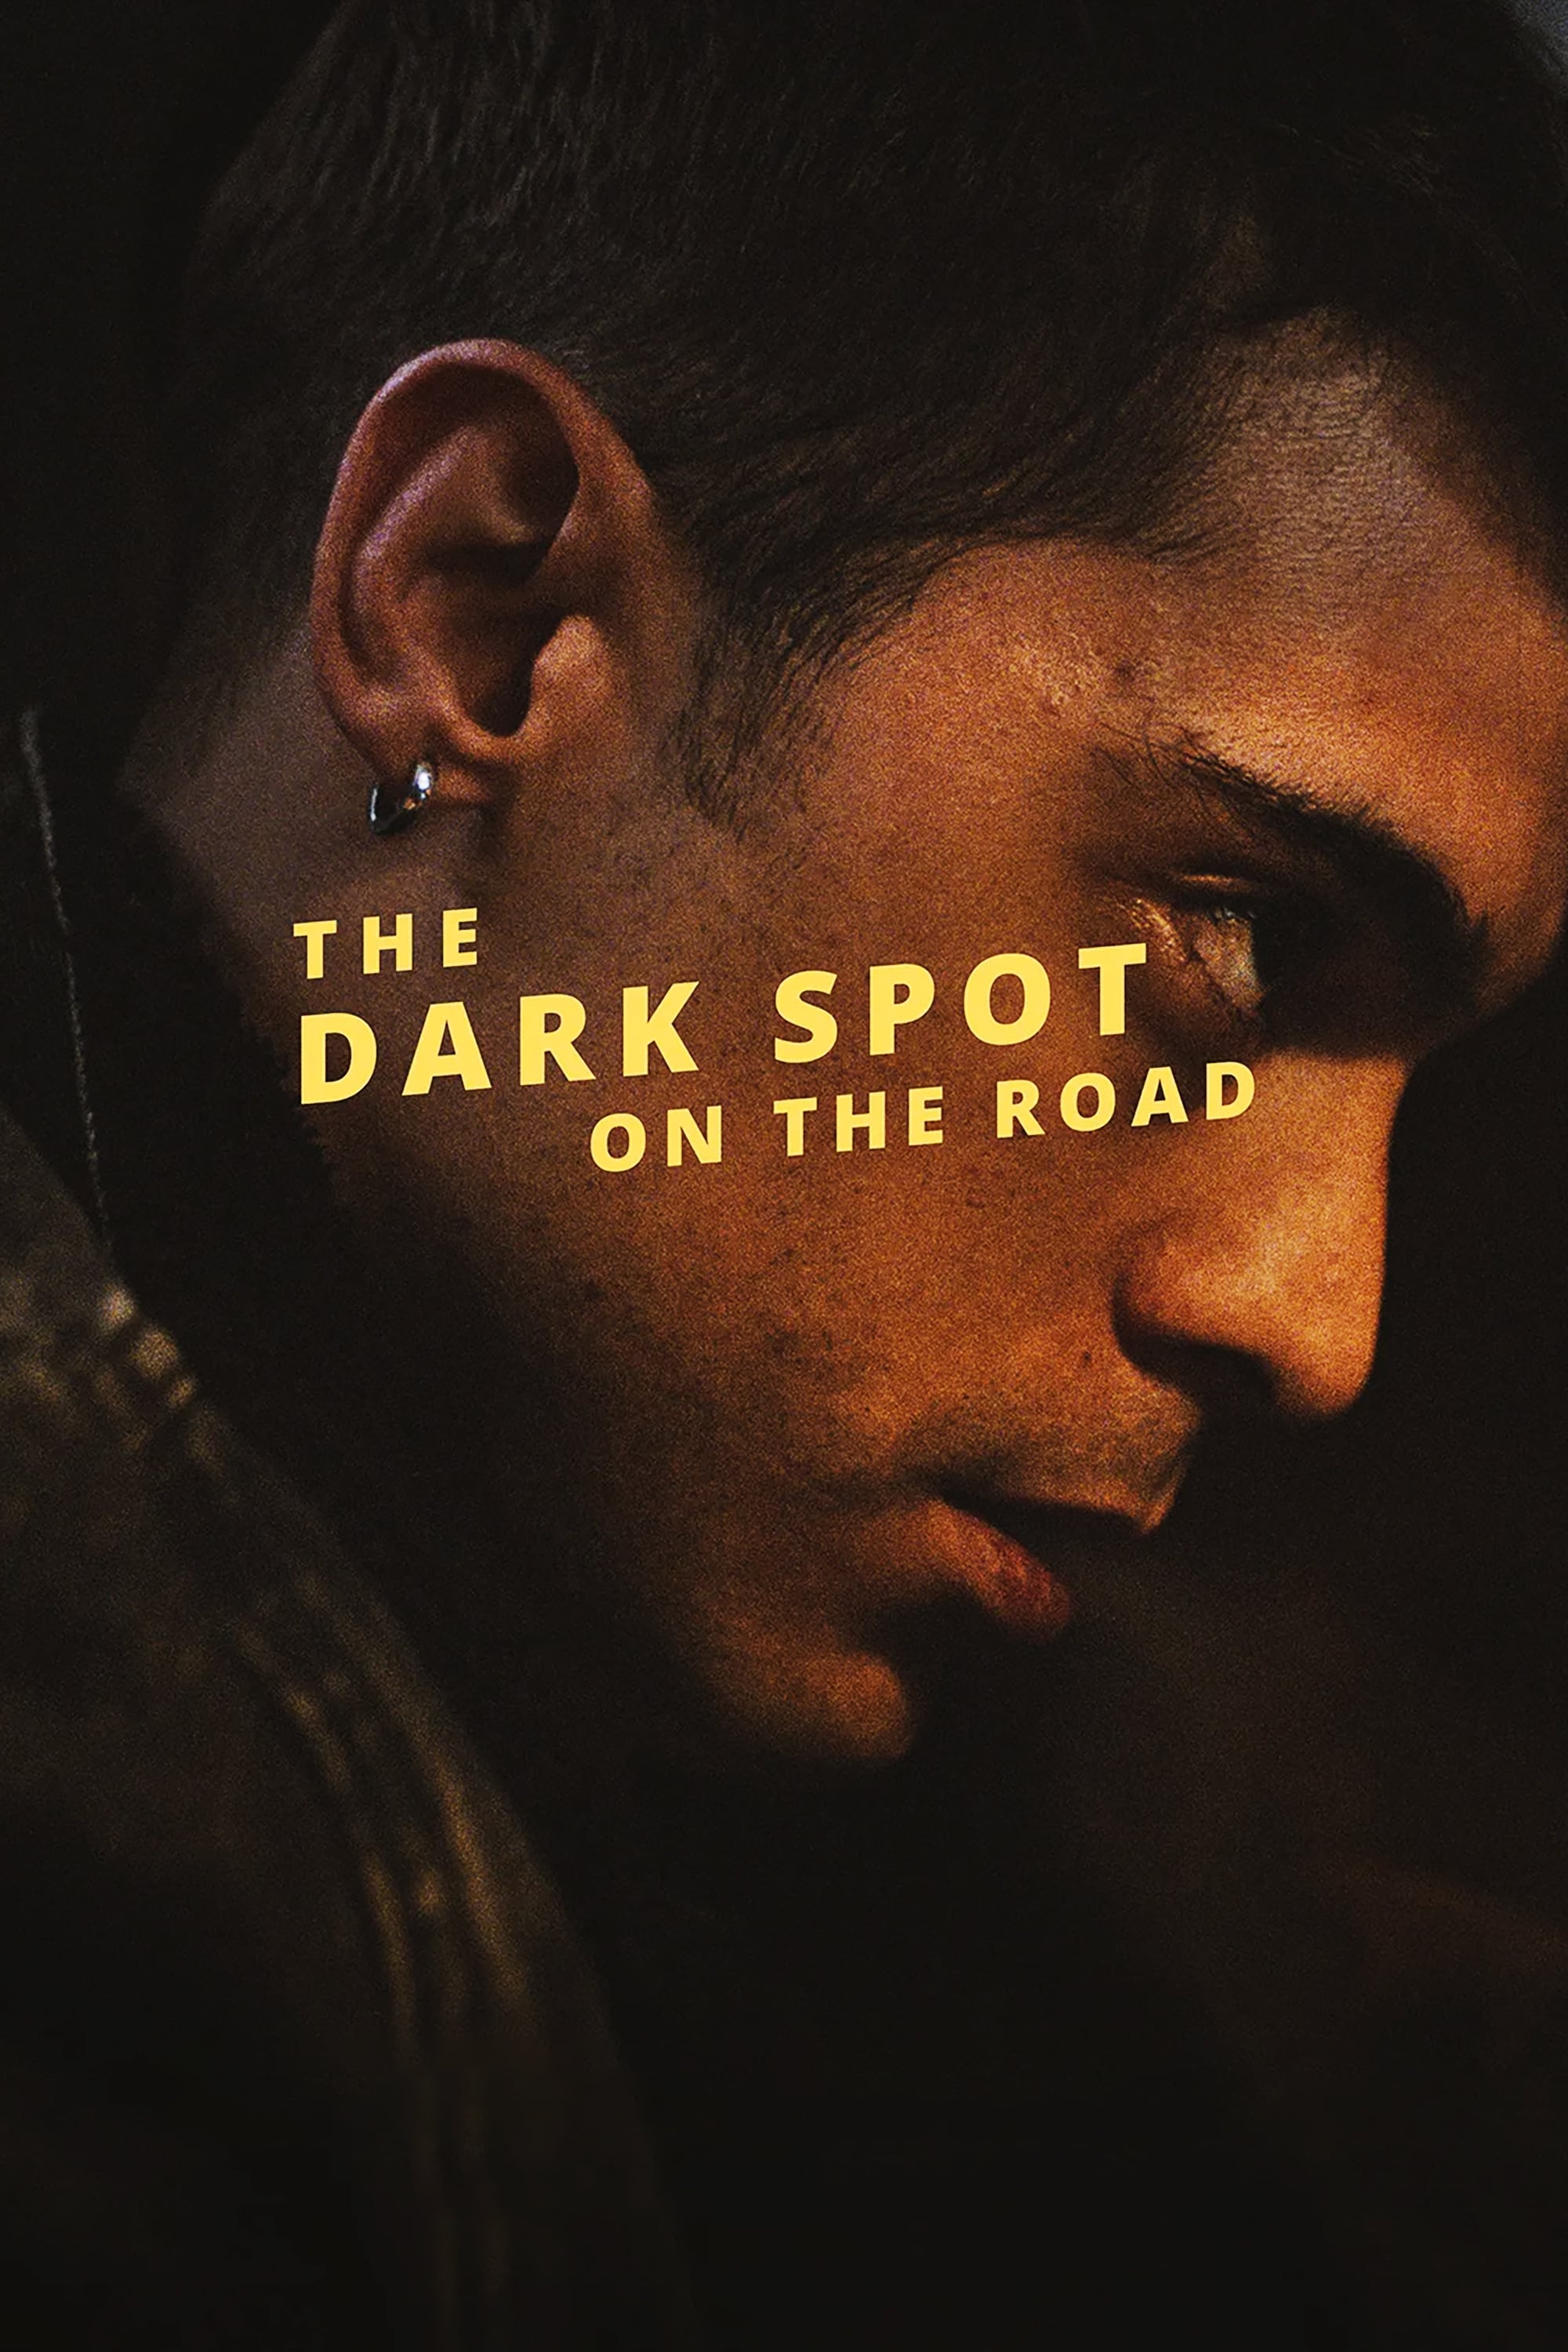 The Dark Spot on the Road